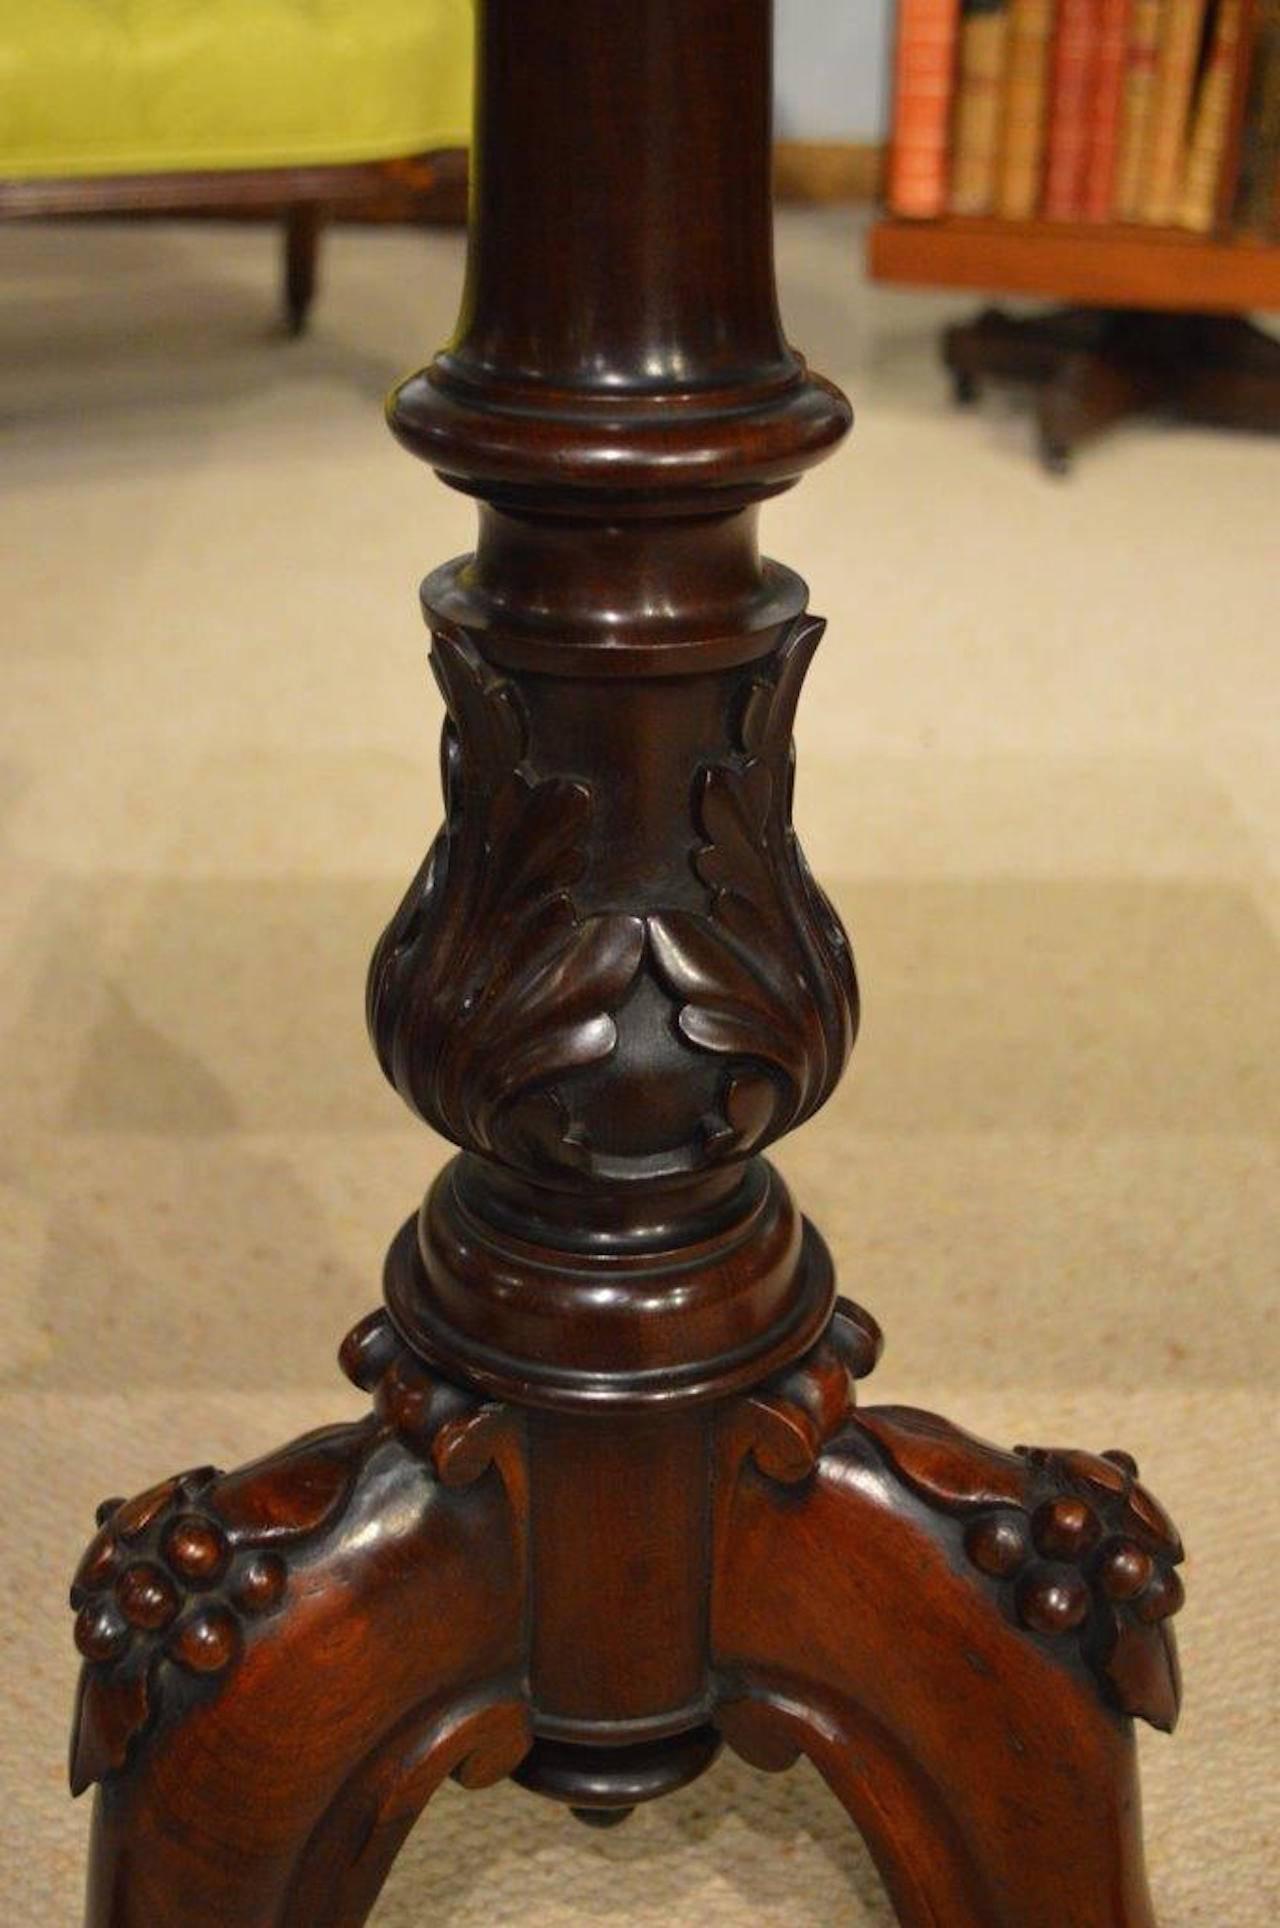 A beautiful satinwood, mahogany and parquetry inlaid early Victorian period antique chess table. The square top with a rosewood and satinwood inlaid chess top with parquetry geometric inlay. Supported on an acanthus carved column with floral carved